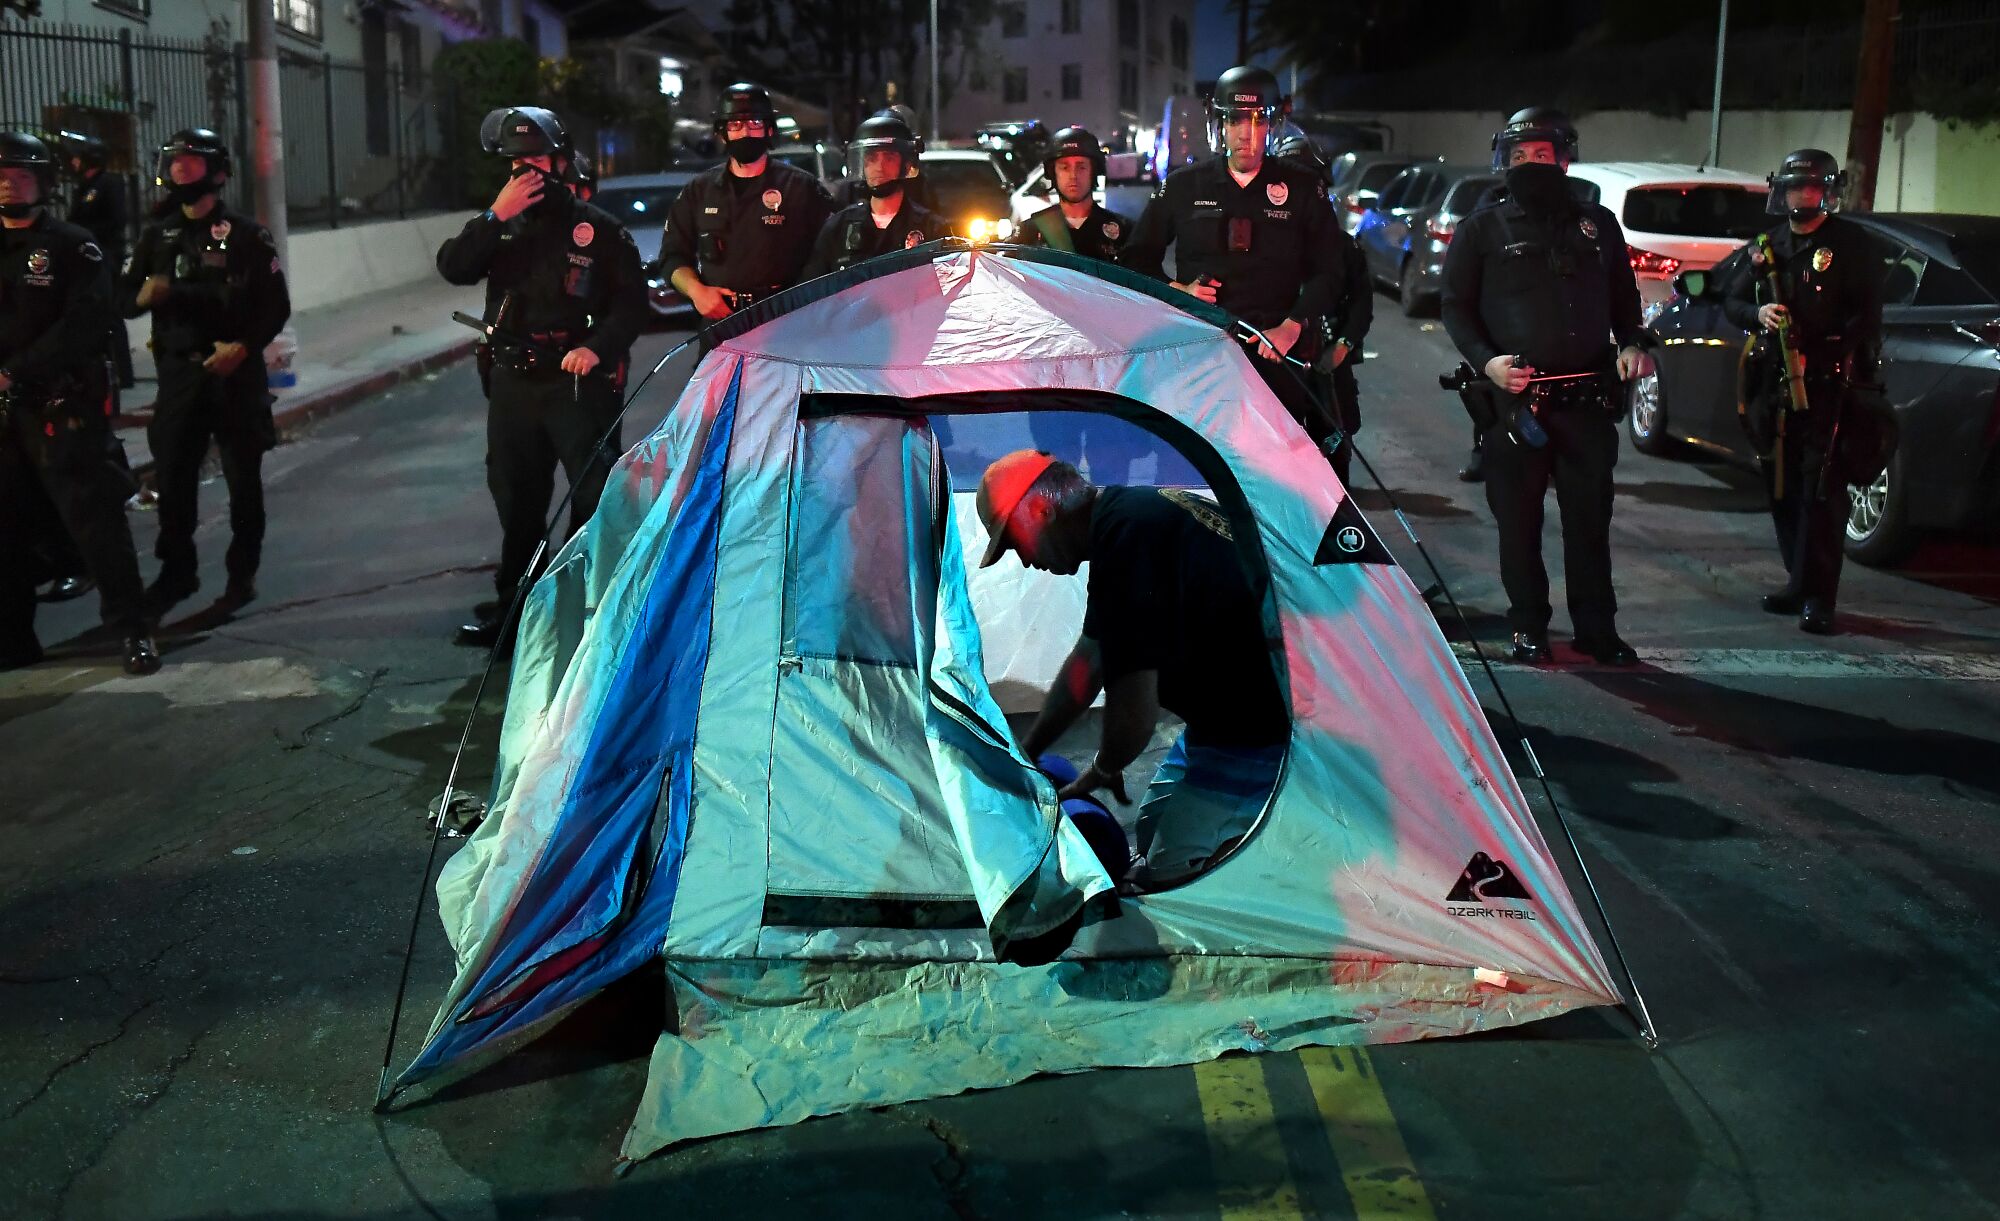 March 24: A protester sets up a tent at Santa Ynez Street and Glendale Avenue as LAPD officers stand guard near Echo Park.